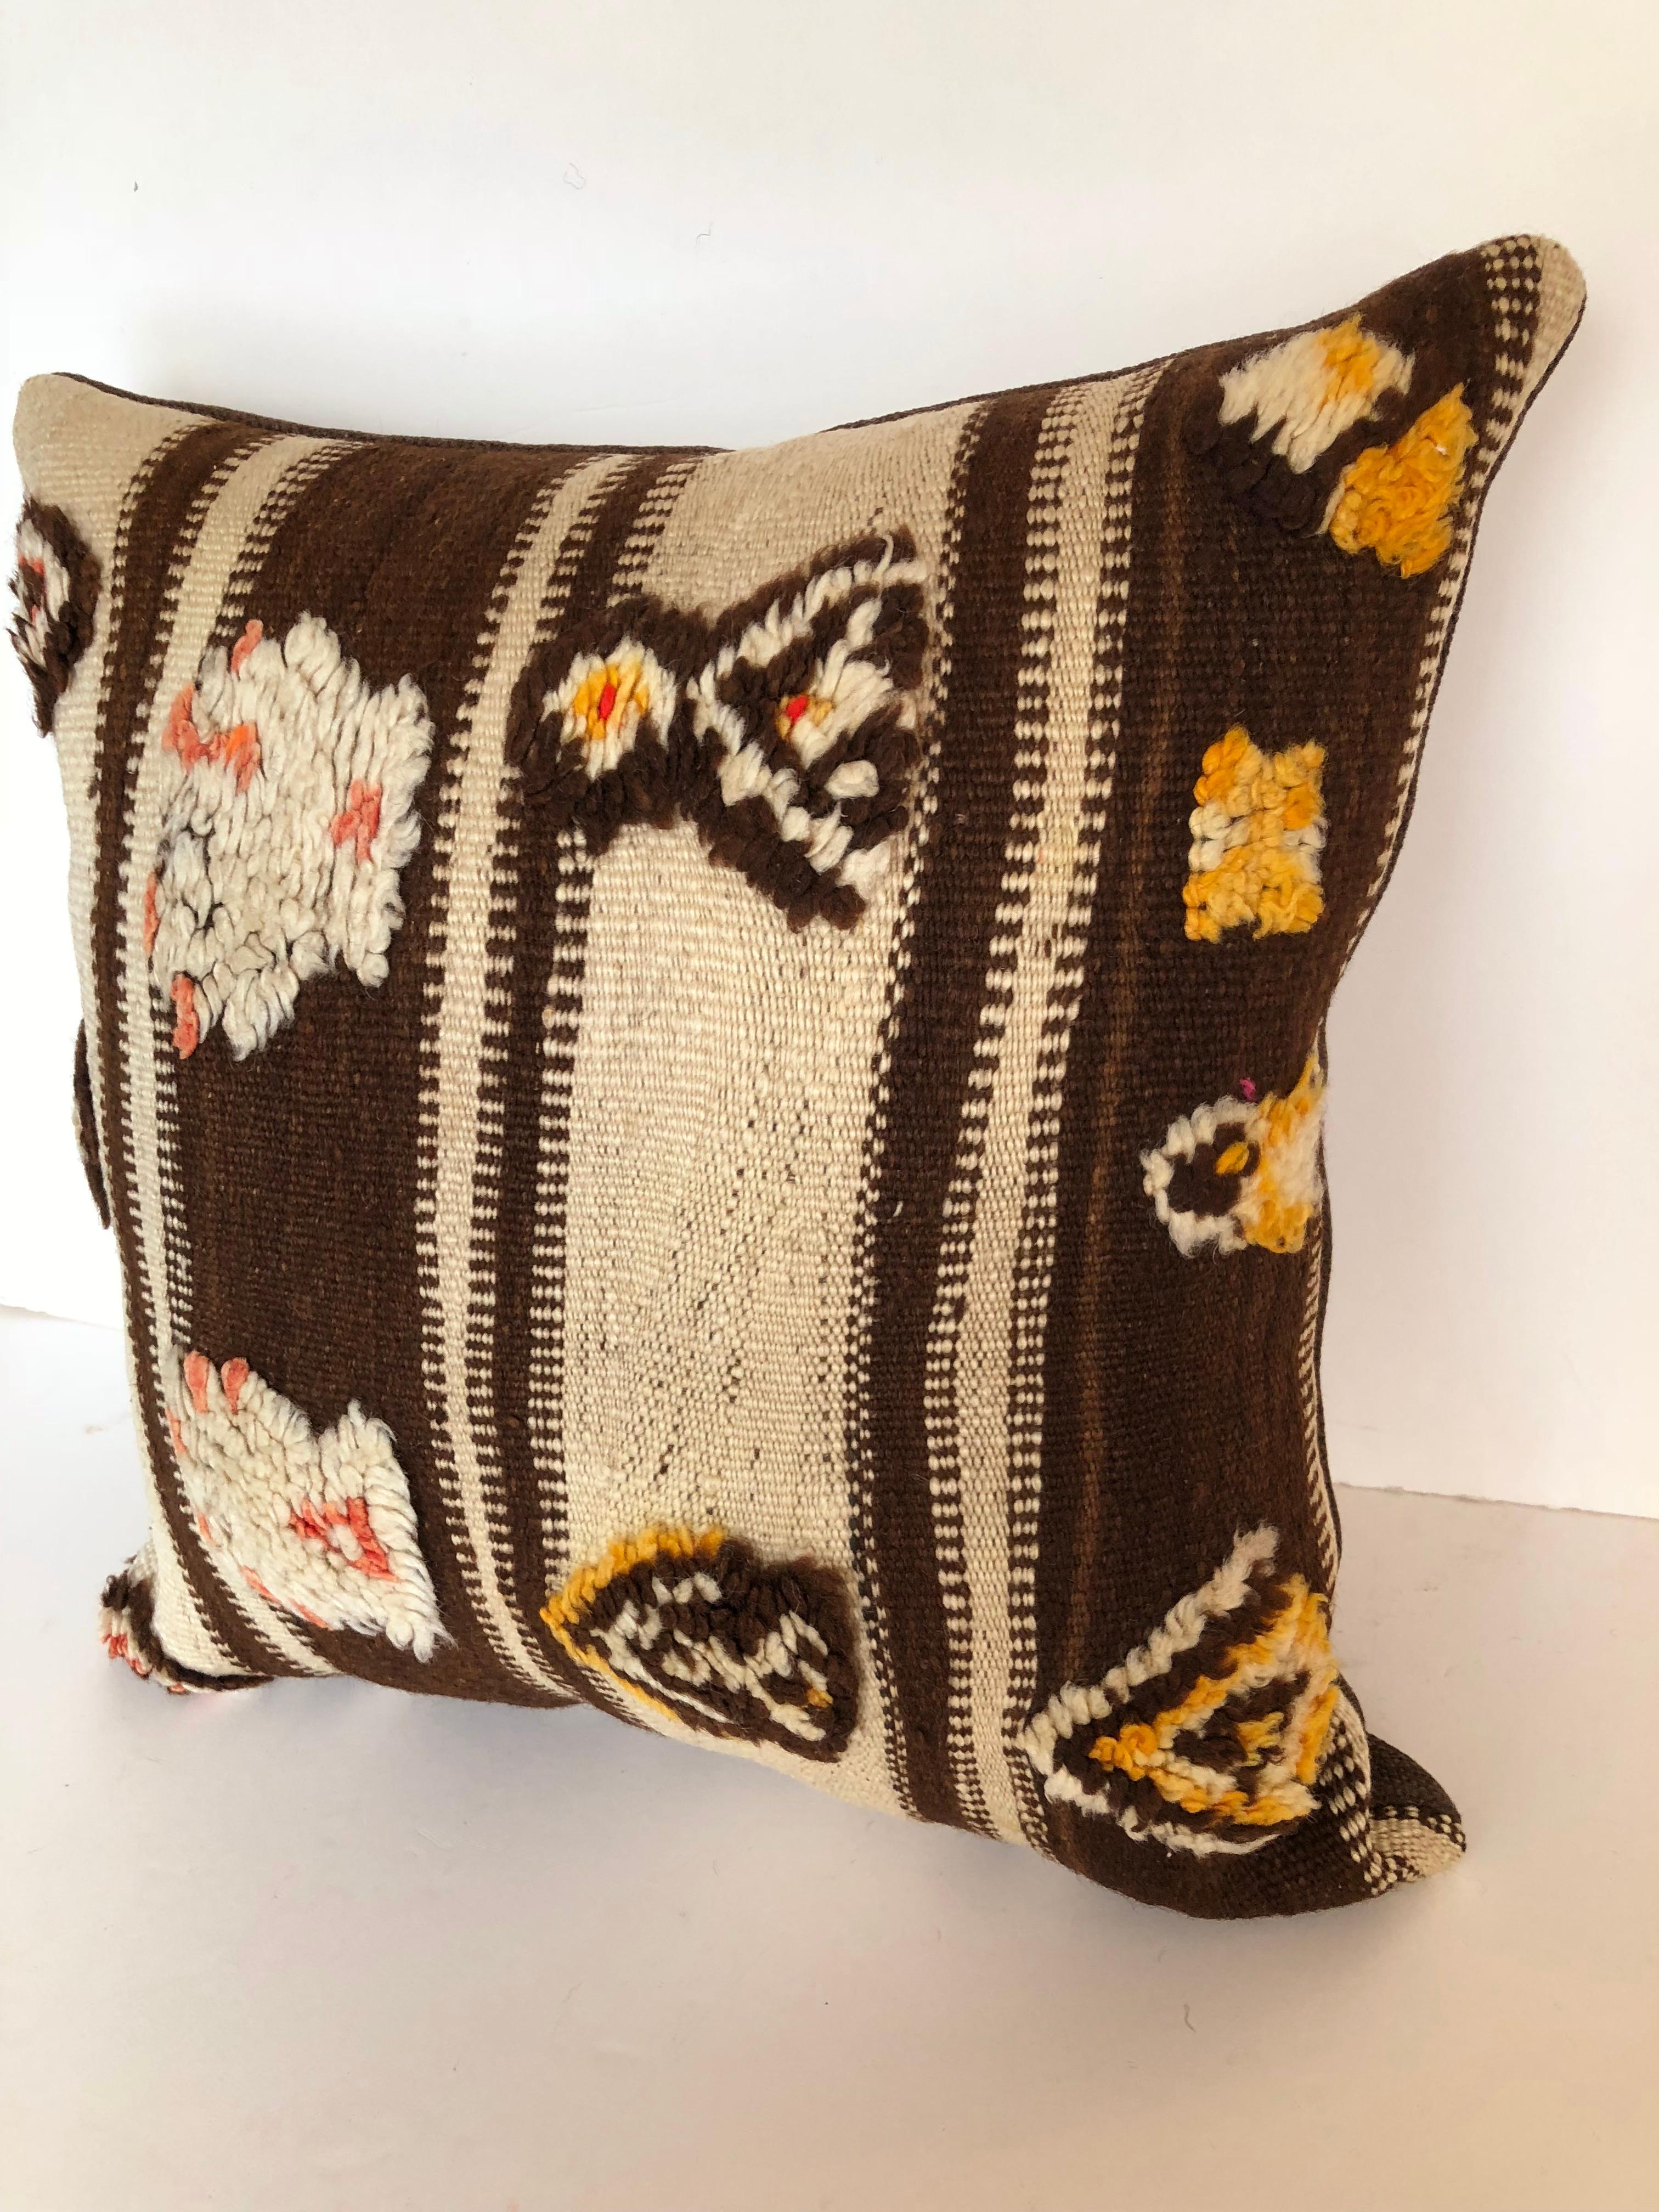 Custom pillow cut from a vintage hand loomed wool Moroccan Berber rug from the Atlas Mountains. Wool is soft and lustrous with natural dyes and tufted tribal designs. Pillows is backed in dark brown linen blend, filled with an insert of 50/50 down